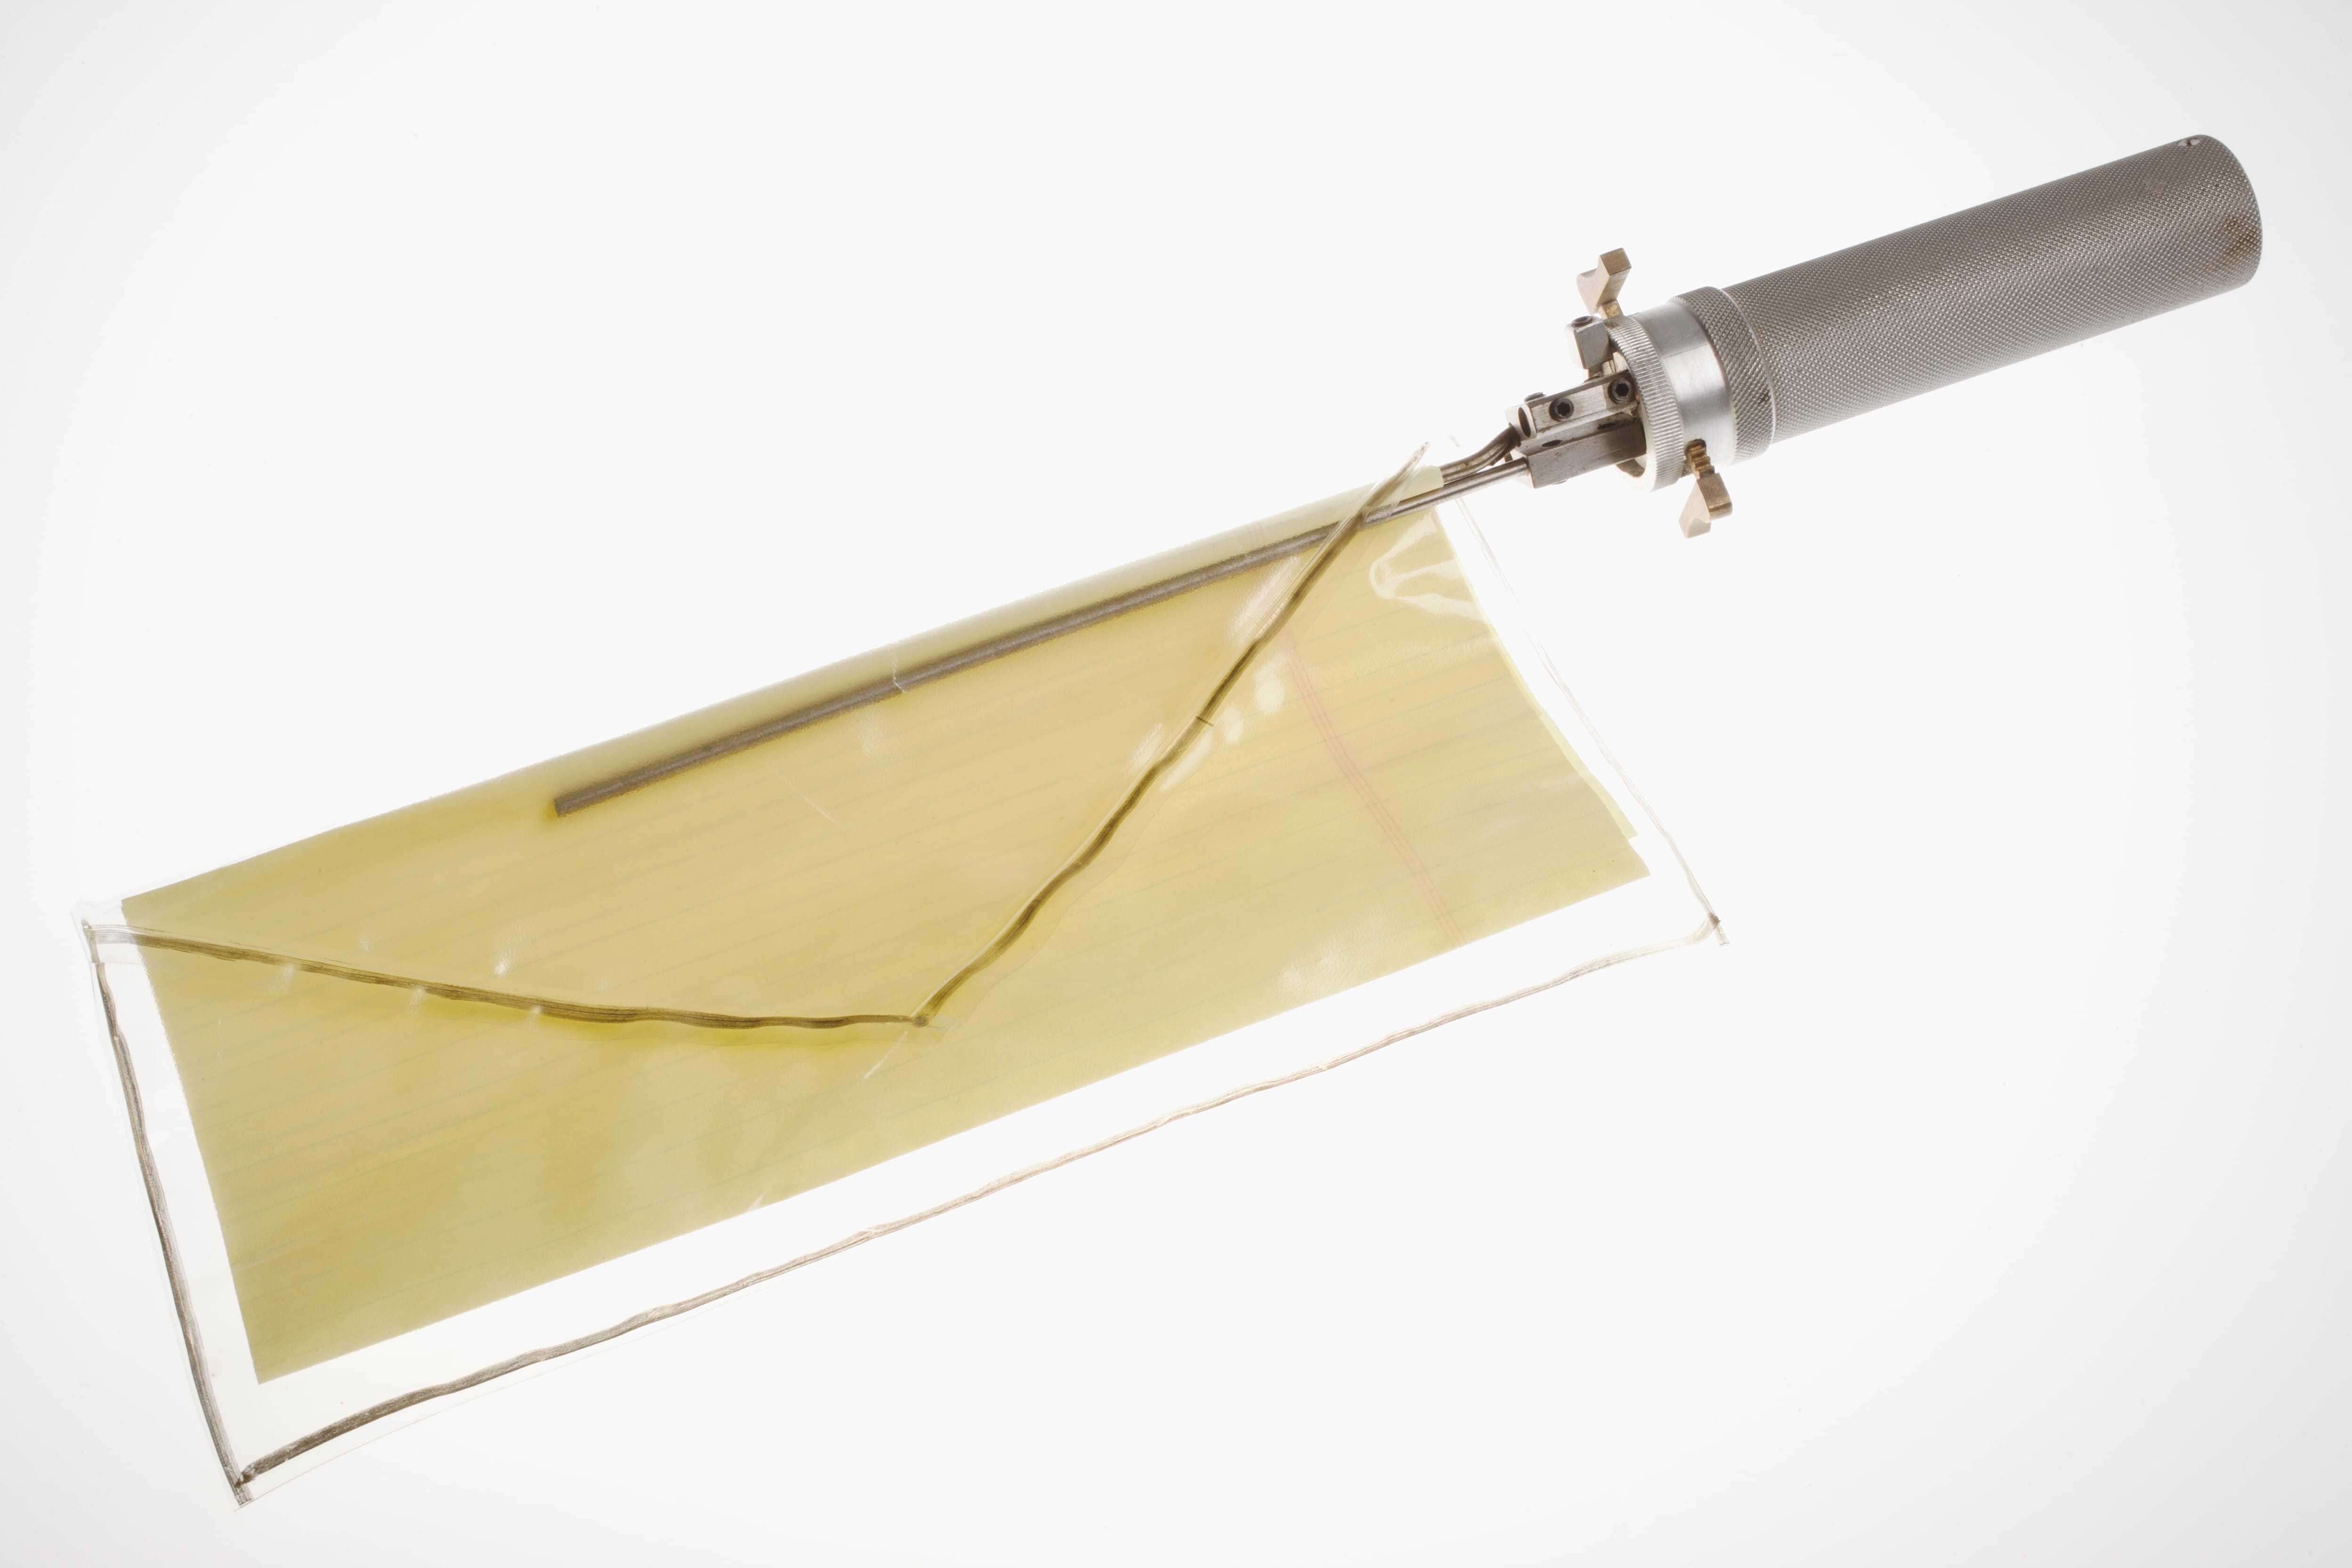 Long, thin pincers on a handle, showing how the device would work with a transparent envelope